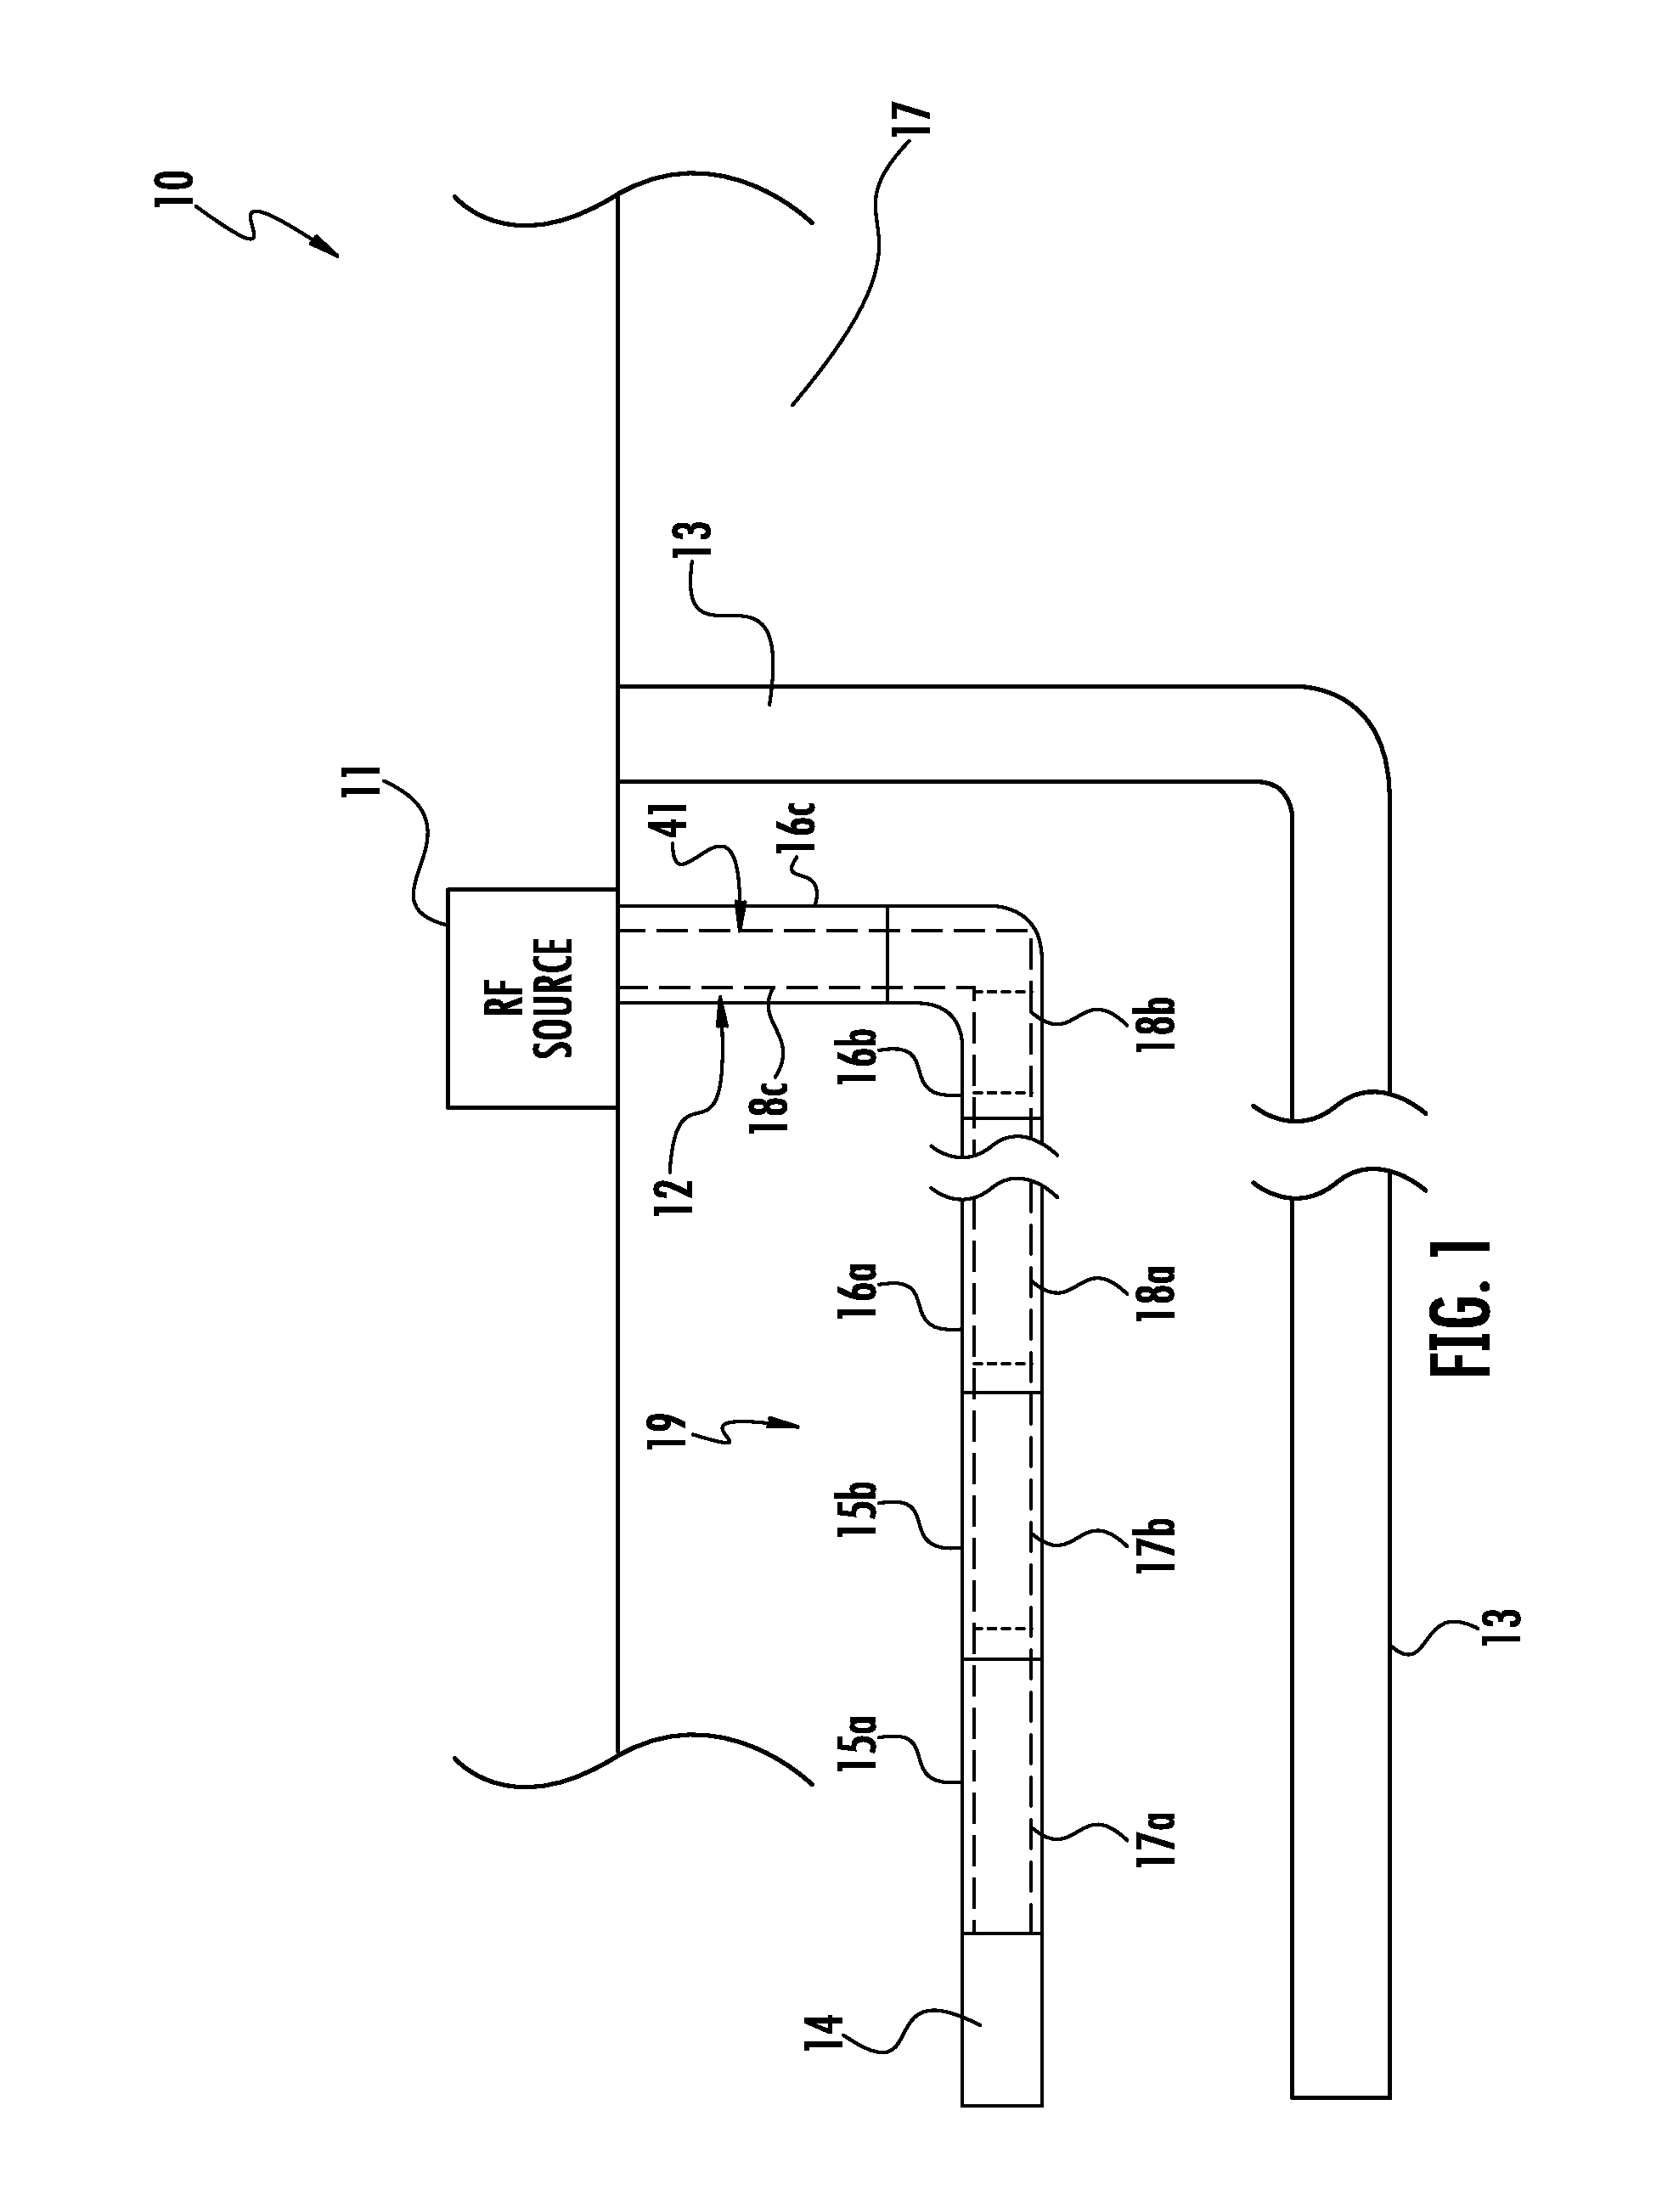 RF antenna assembly with spacer and sheath and related methods